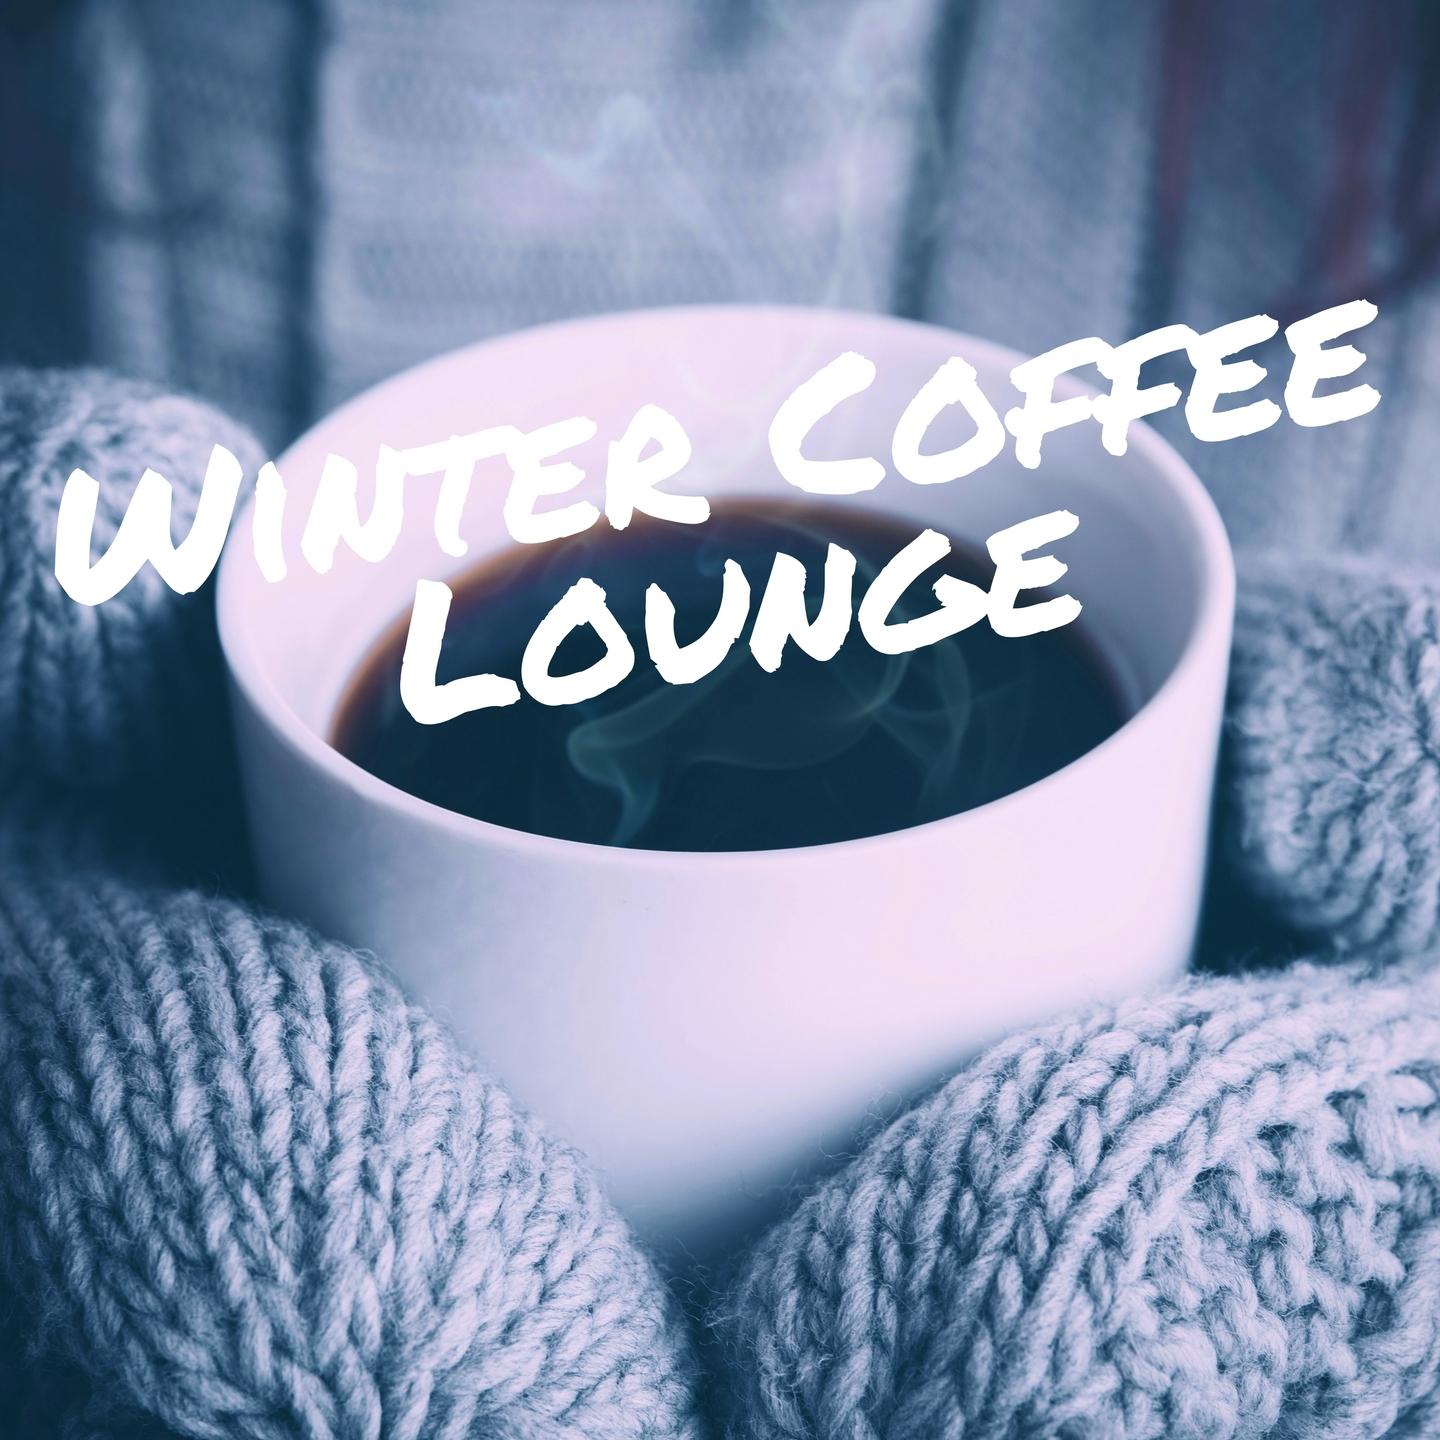 Winter Coffee Lounge (60 Tracks Finest Relaxed Cosy Winter Coffee Piano Lounge & Smooth Jazz Music)